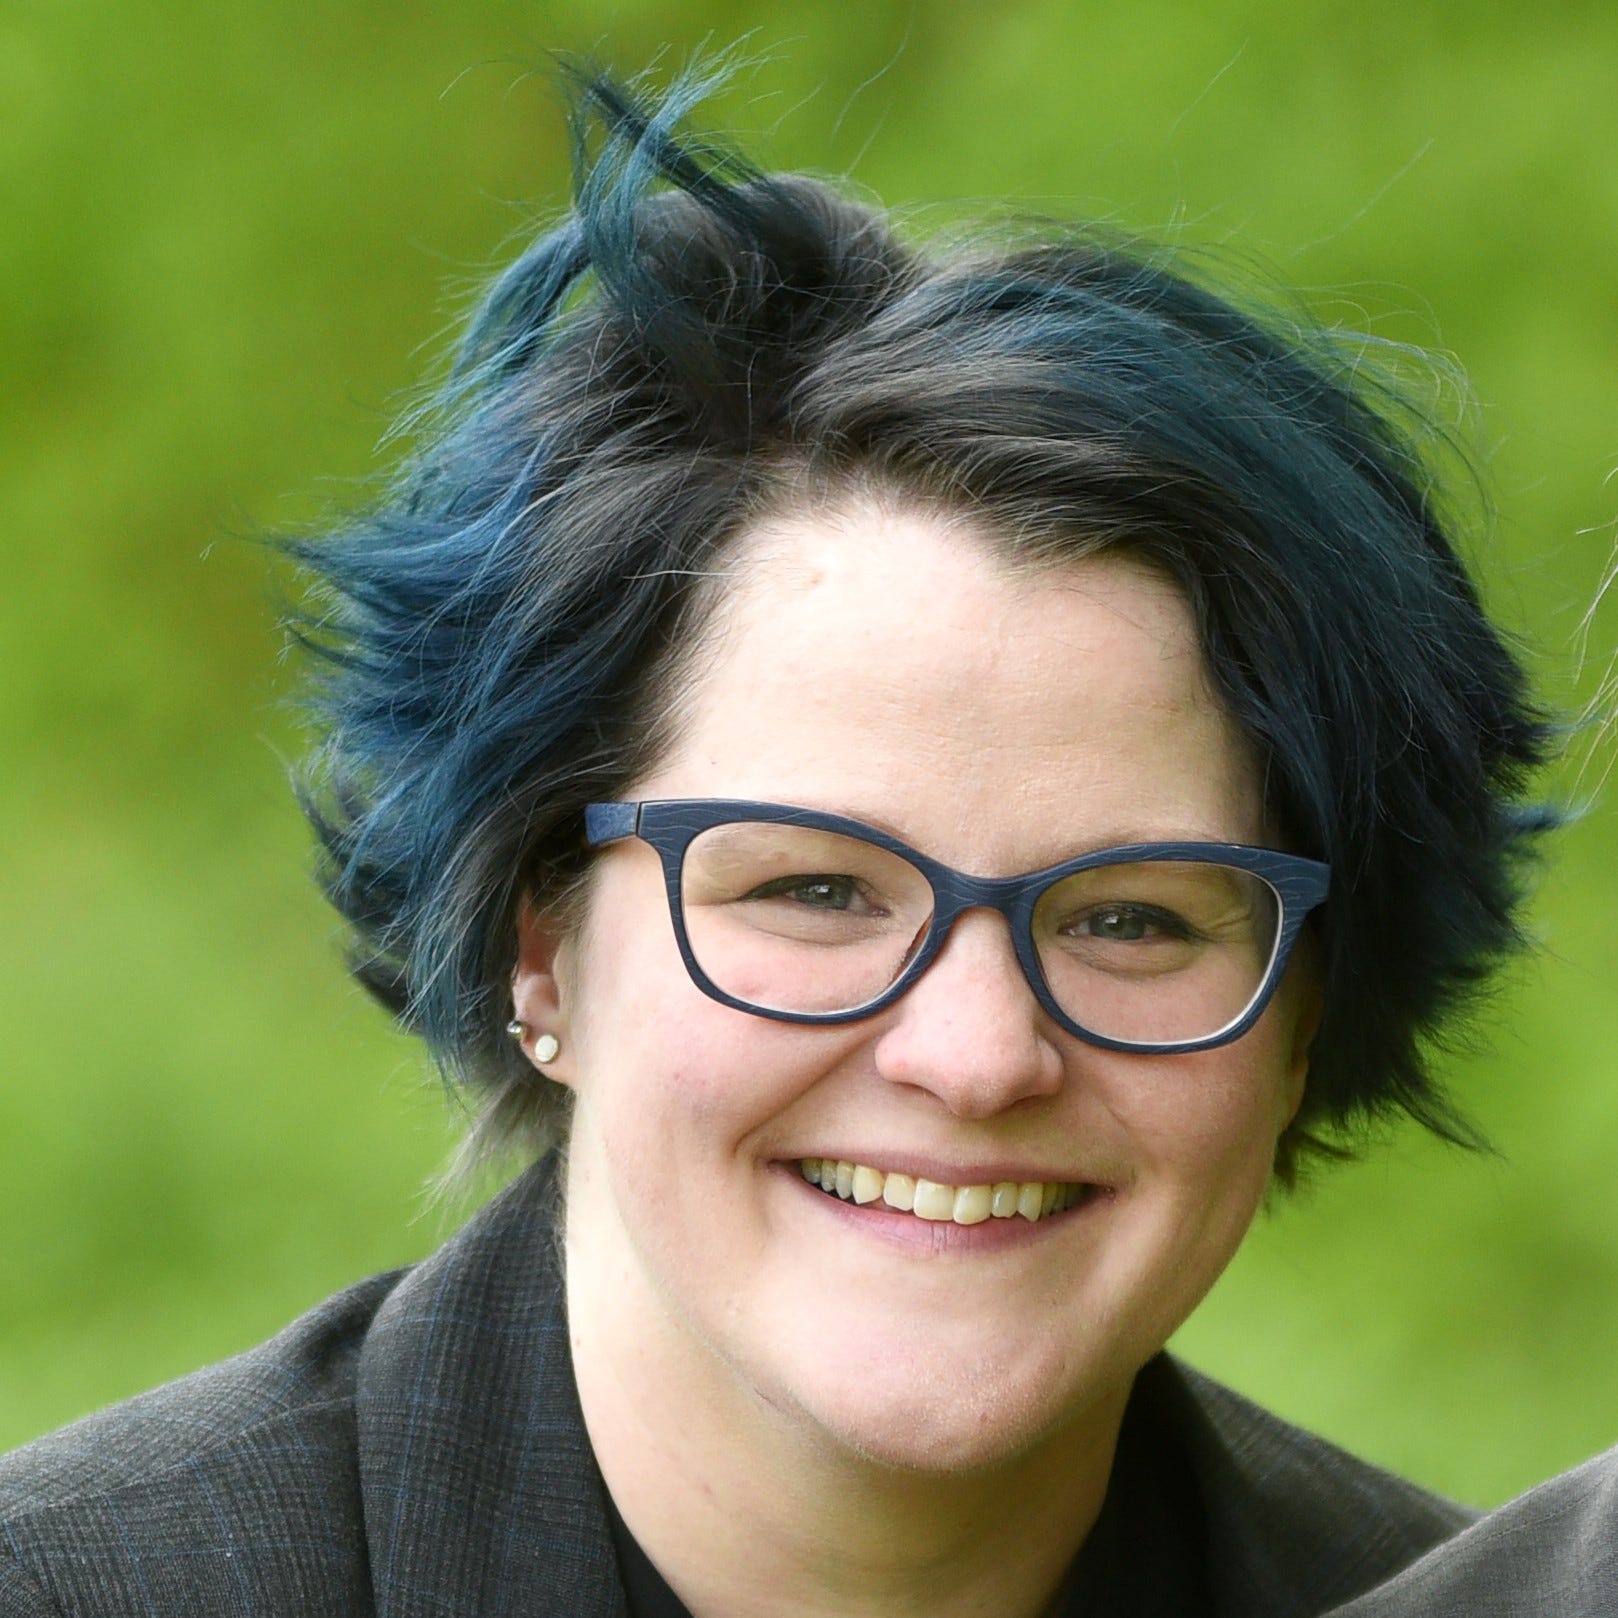 Emily Nagoski has blue and black hair, and wears stylish dark-rimmed glasses. She is smiling into the camera and the background behind her is blurred greenery.